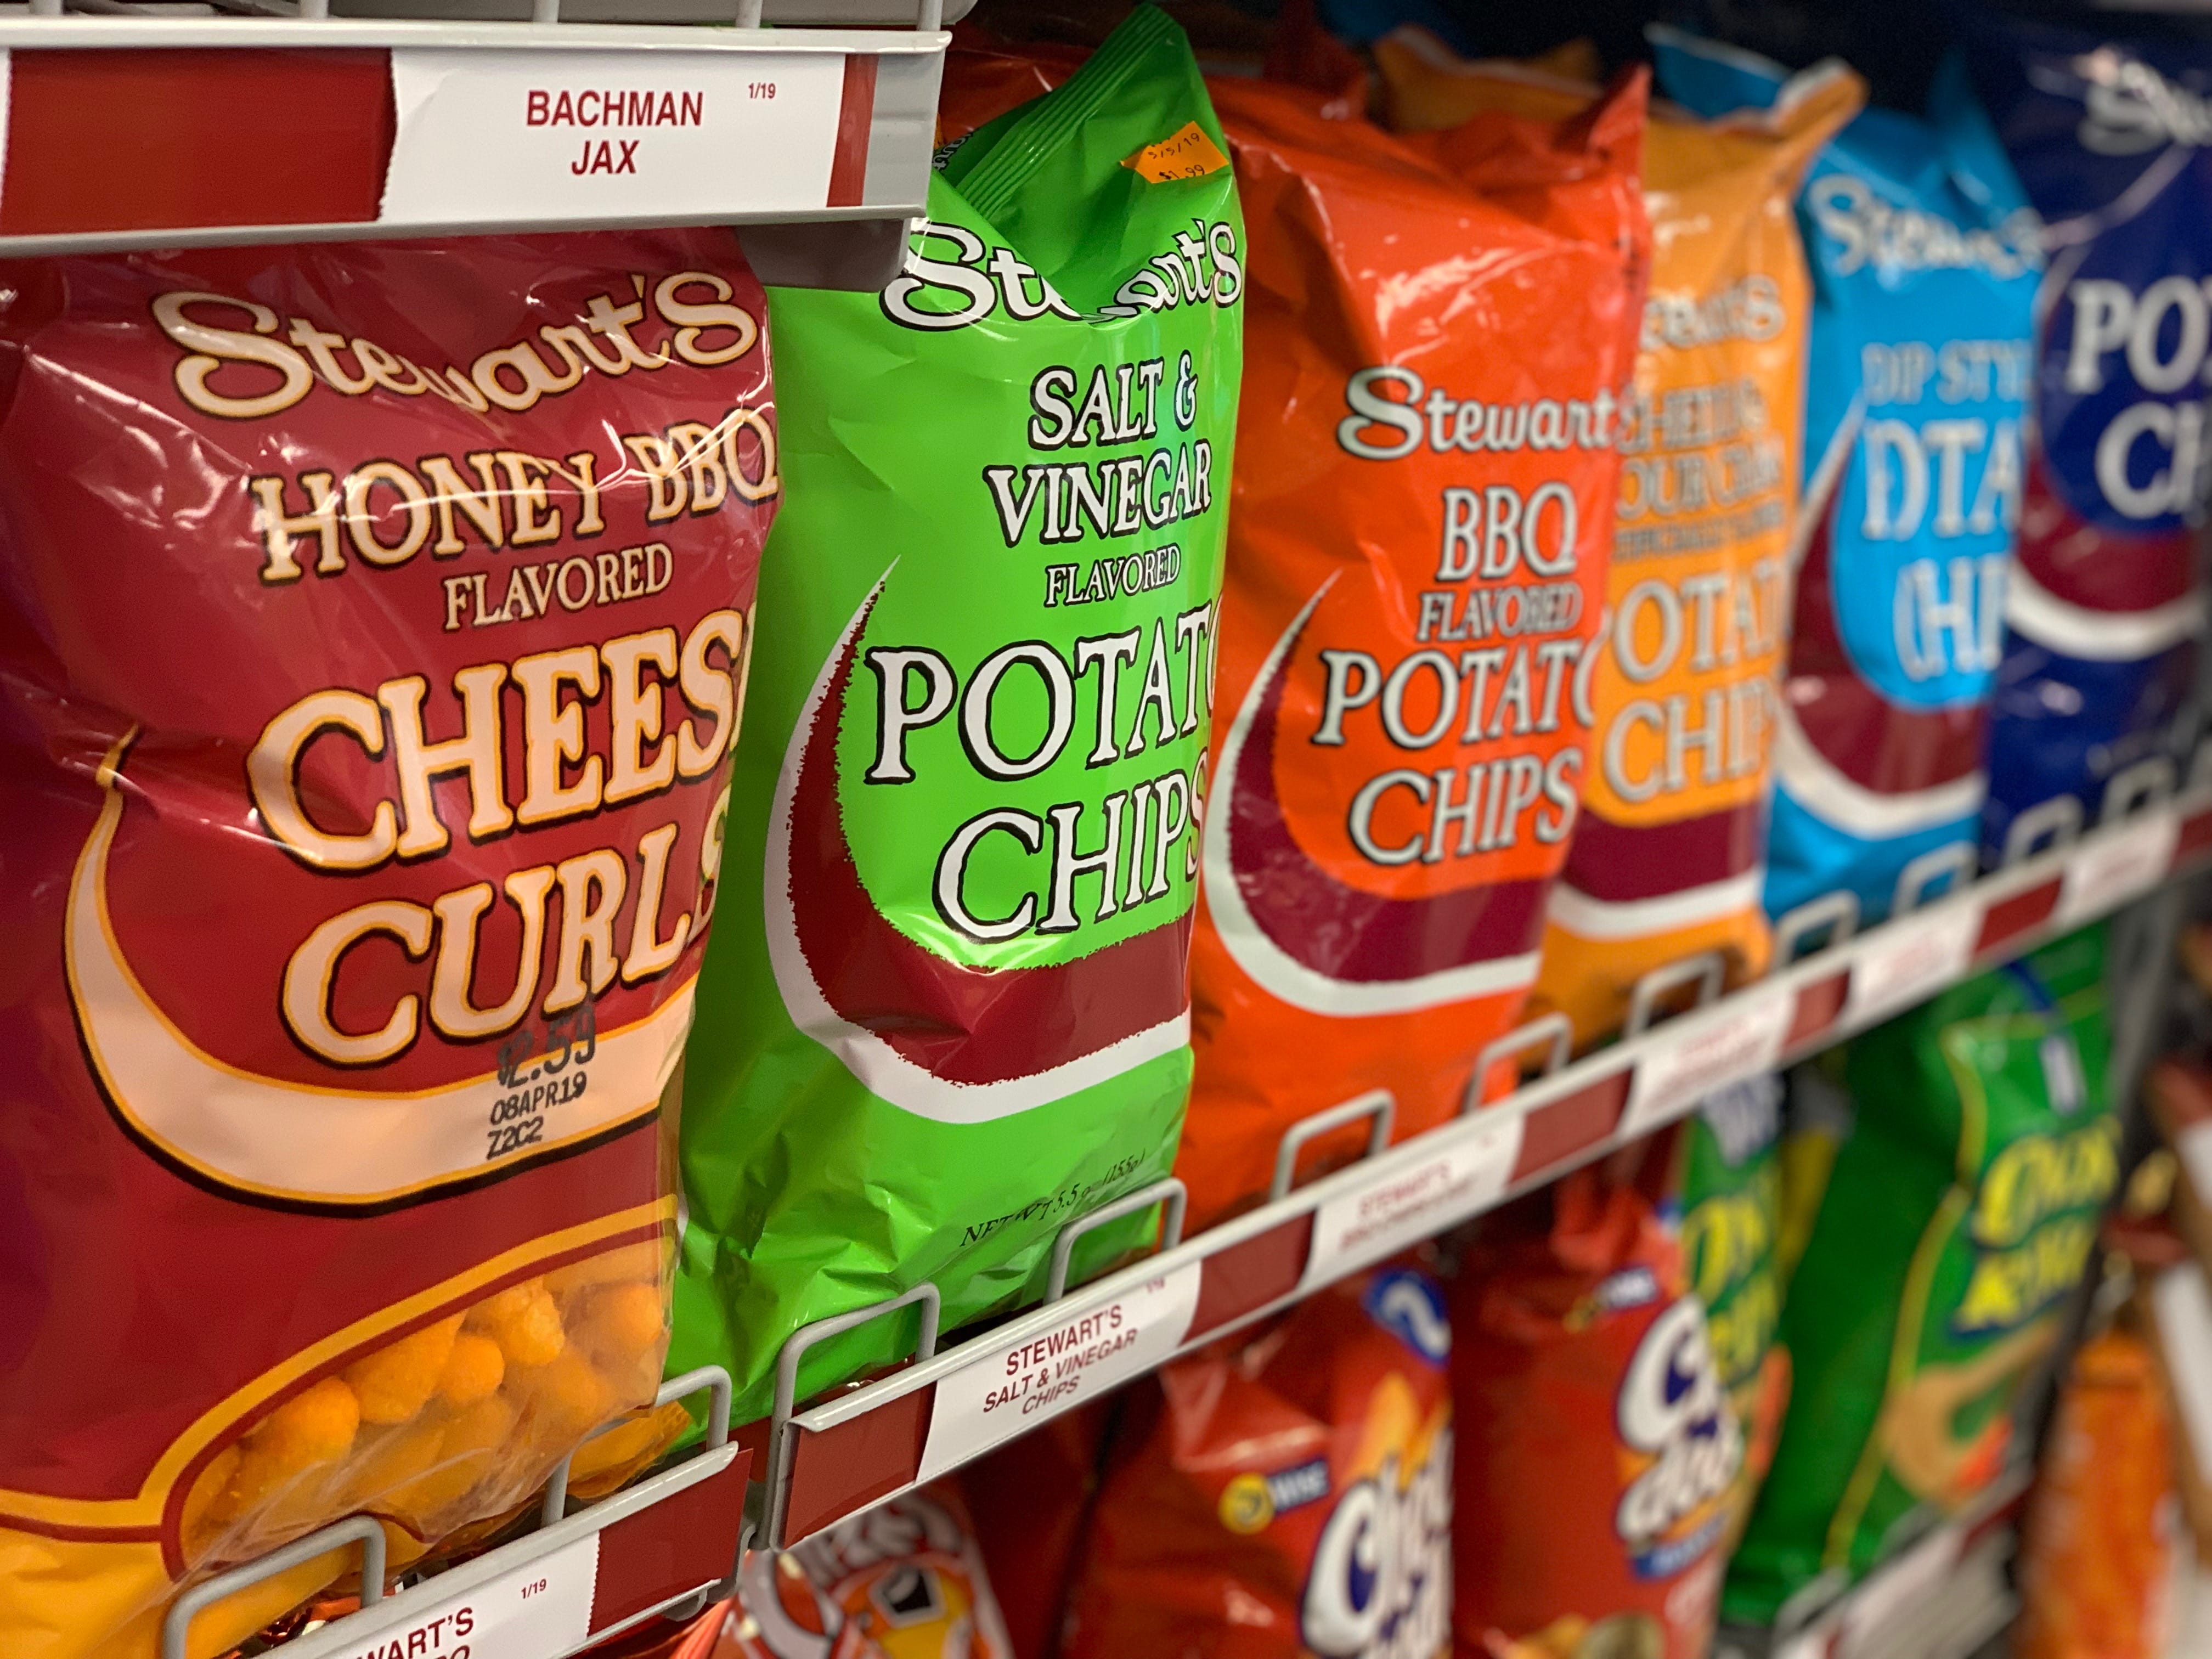 Stewart's Different Types of Chips